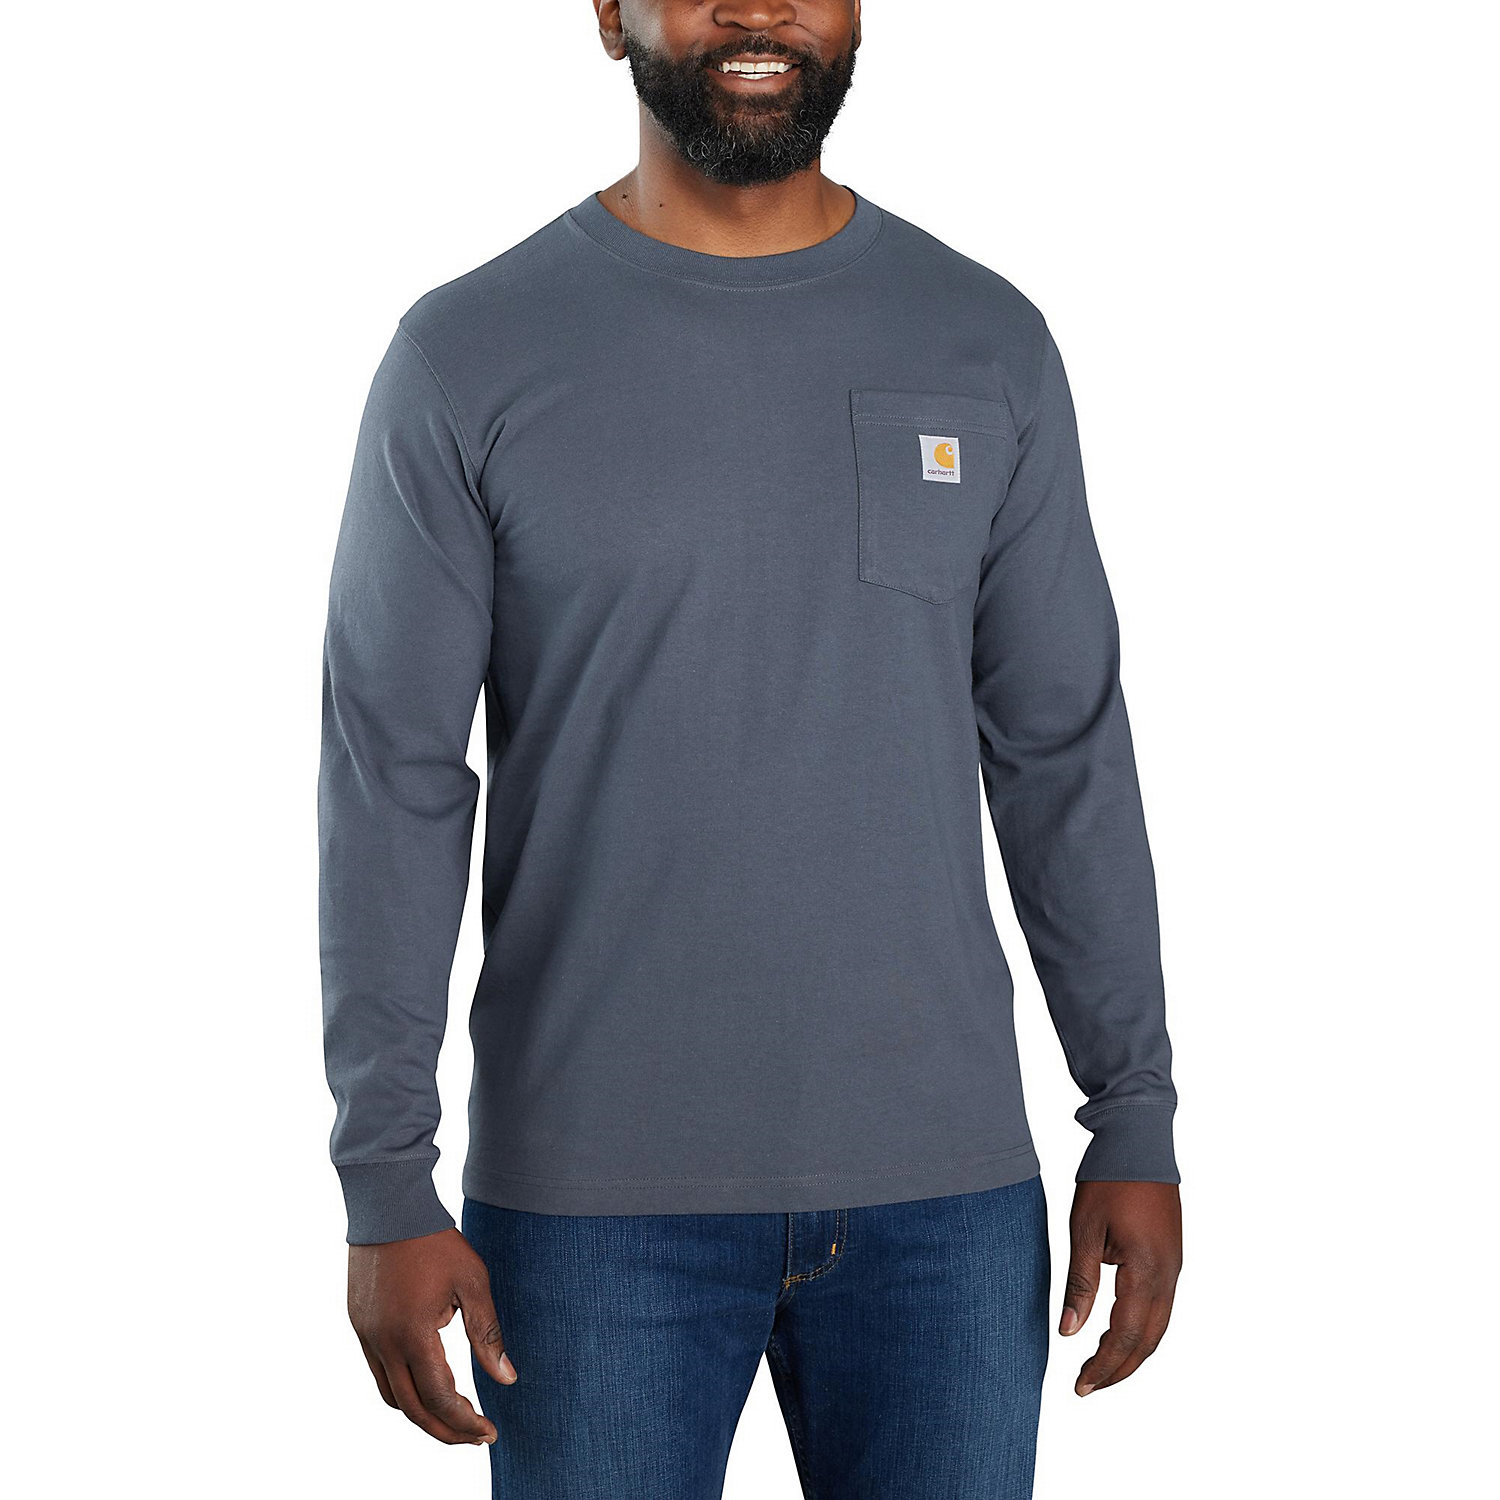 Carhartt Mens Relaxed Fit Heavyweight LS Pocket Crafted Graphic T-Shirt